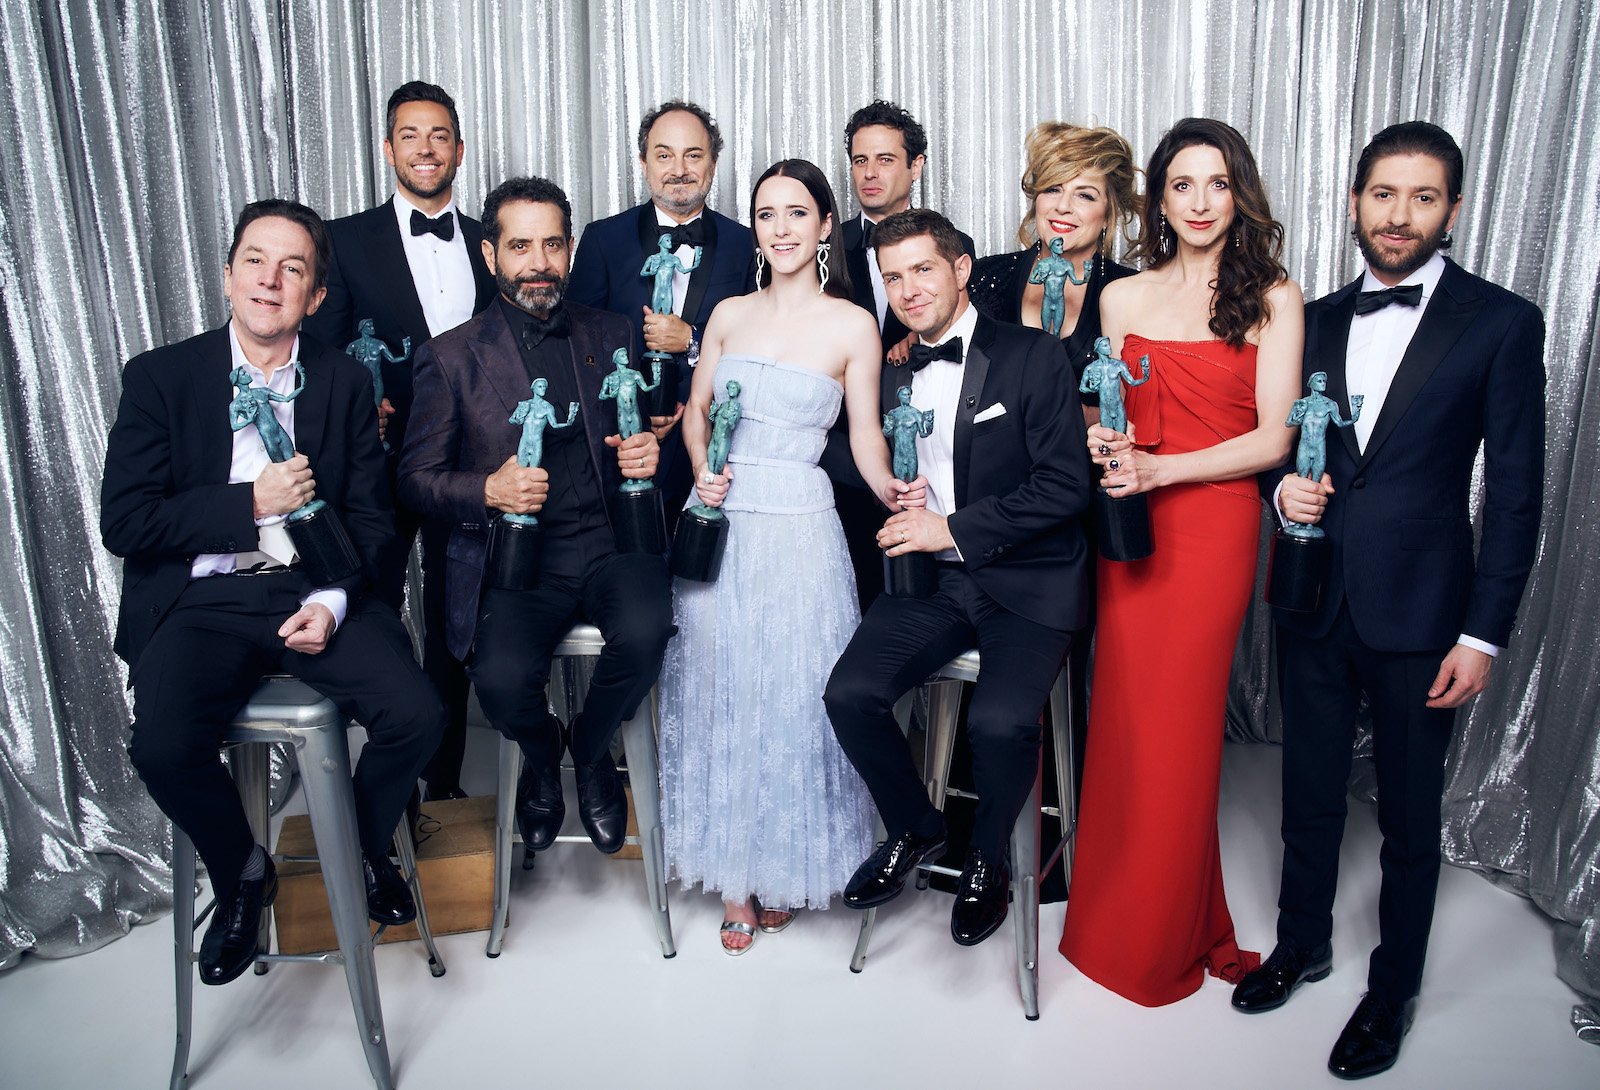 The cast of 'The Marvelous Mrs. Maisel' posing together after it won the SAG award in 2019.